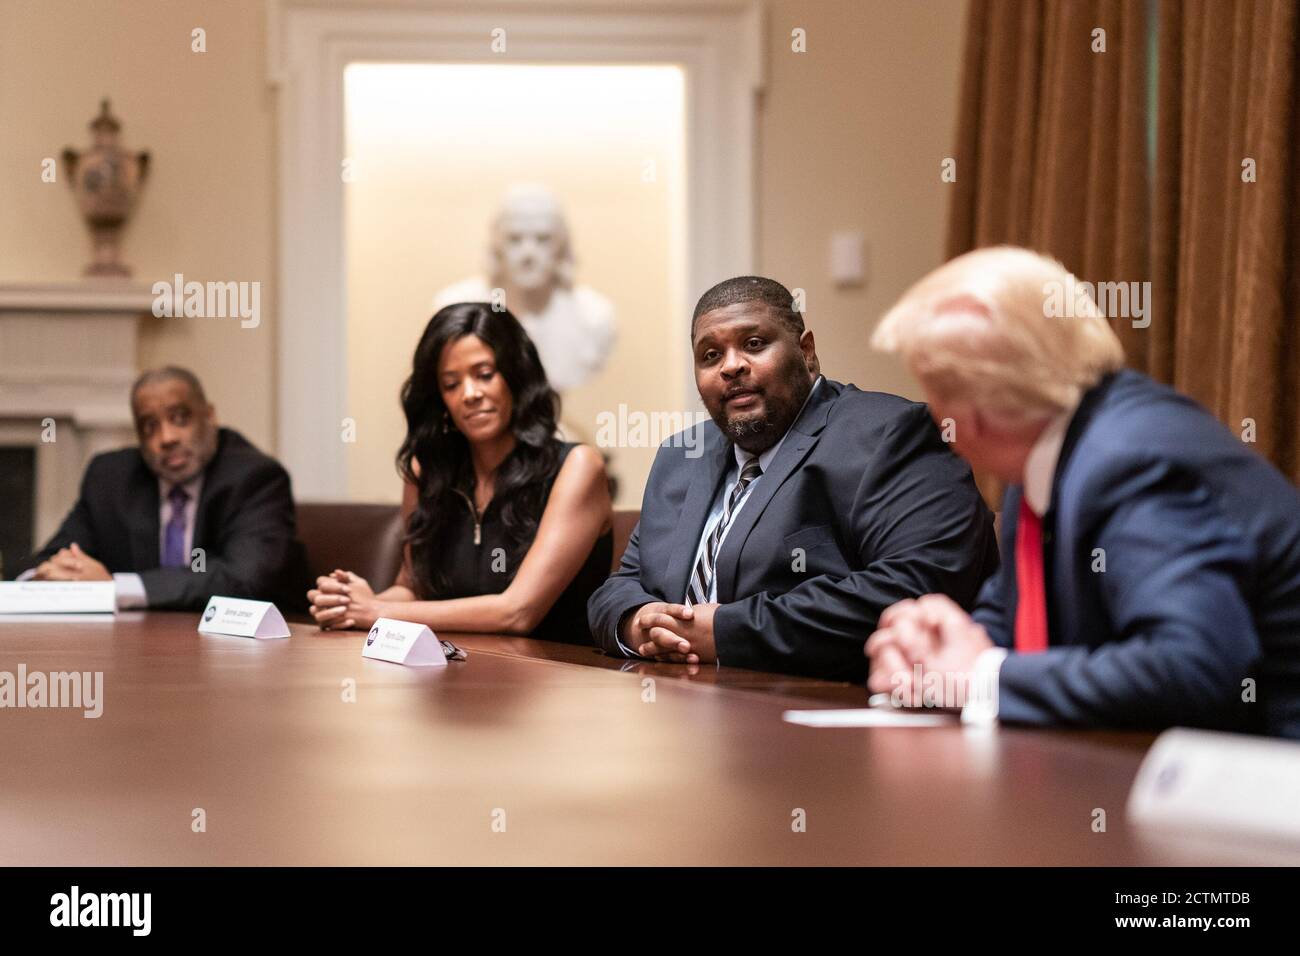 President Trump Participates in a Roundtable on Race Relations. President Donald J. Trump listens radio host Wayne Dupree address her remarks during a roundtable on race relations Wednesday, June 10, 2020, with prominent black leaders in the Cabinet Room of the White House. Stock Photo